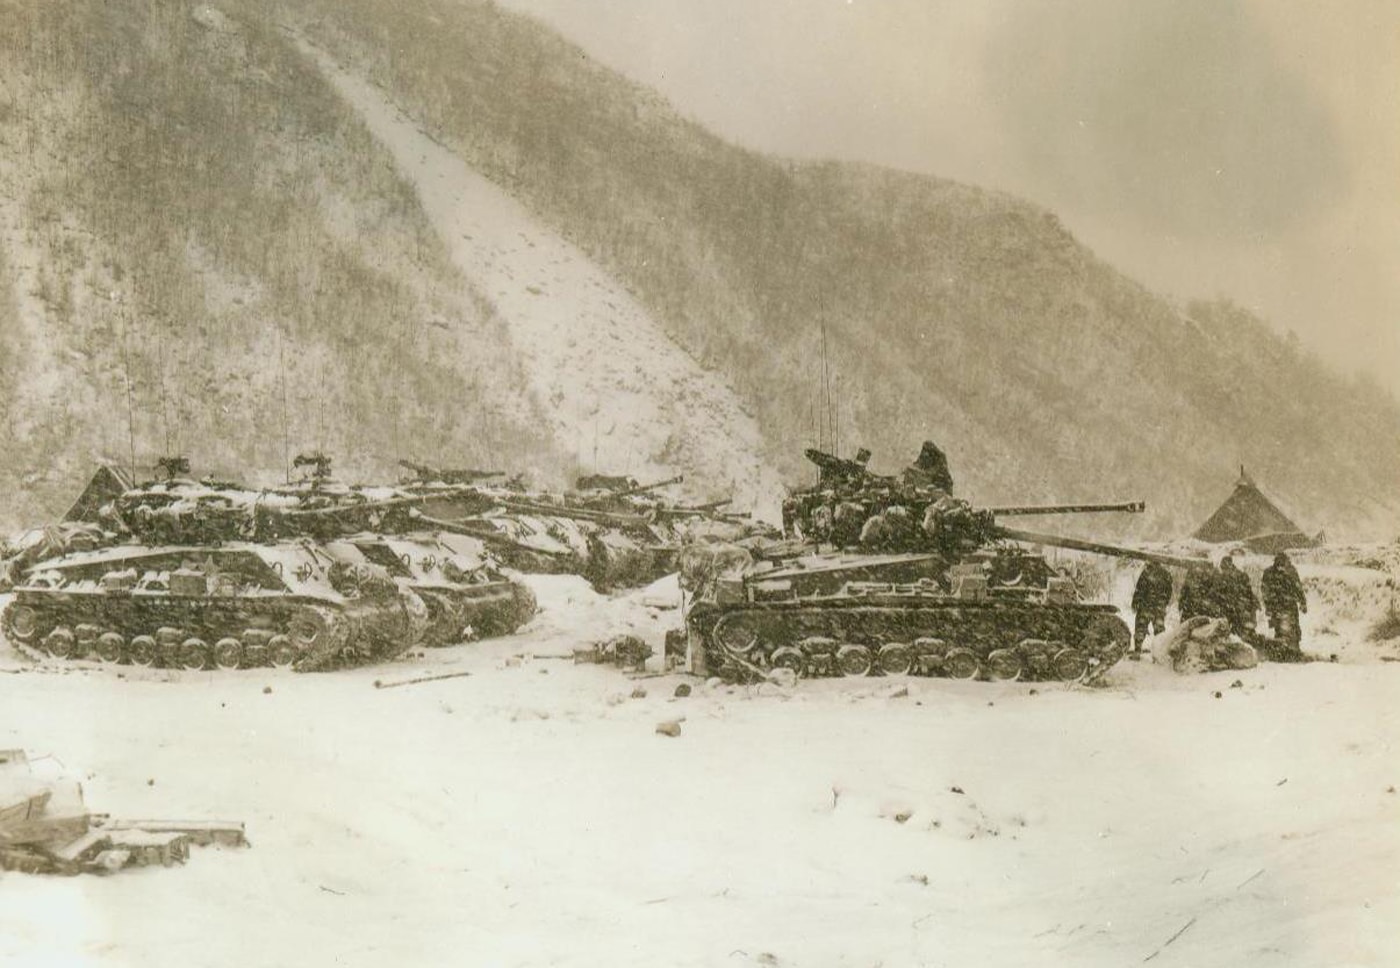 In this image, we see American tanks sitting in the snow on the perimeter of Koto-ri in December 1950.